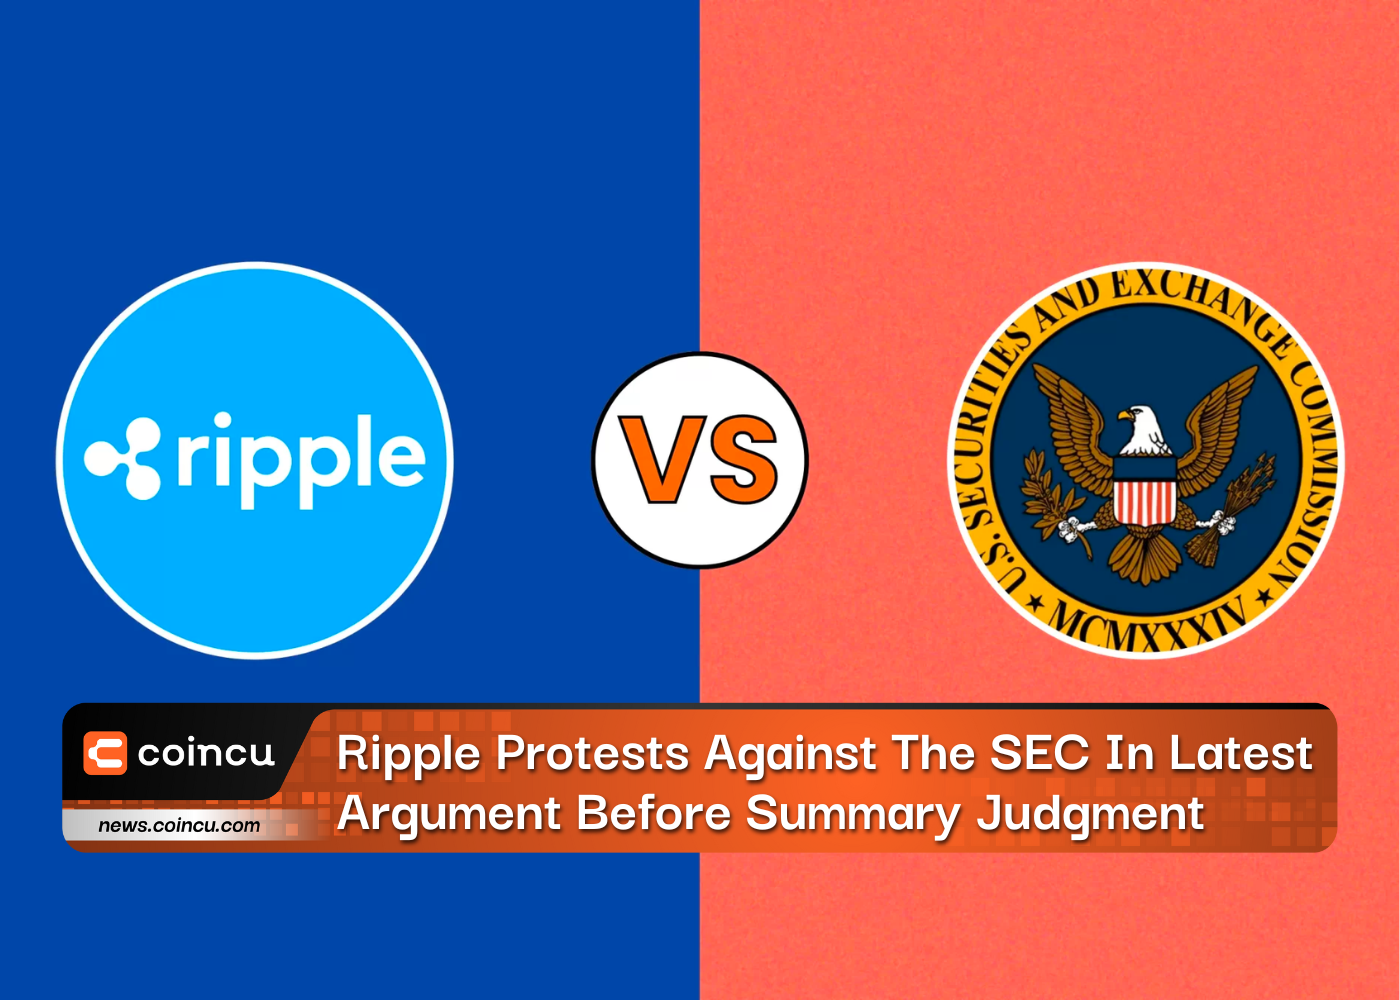 Ripple Protests Against The SEC In Latest Argument Before Summary Judgment